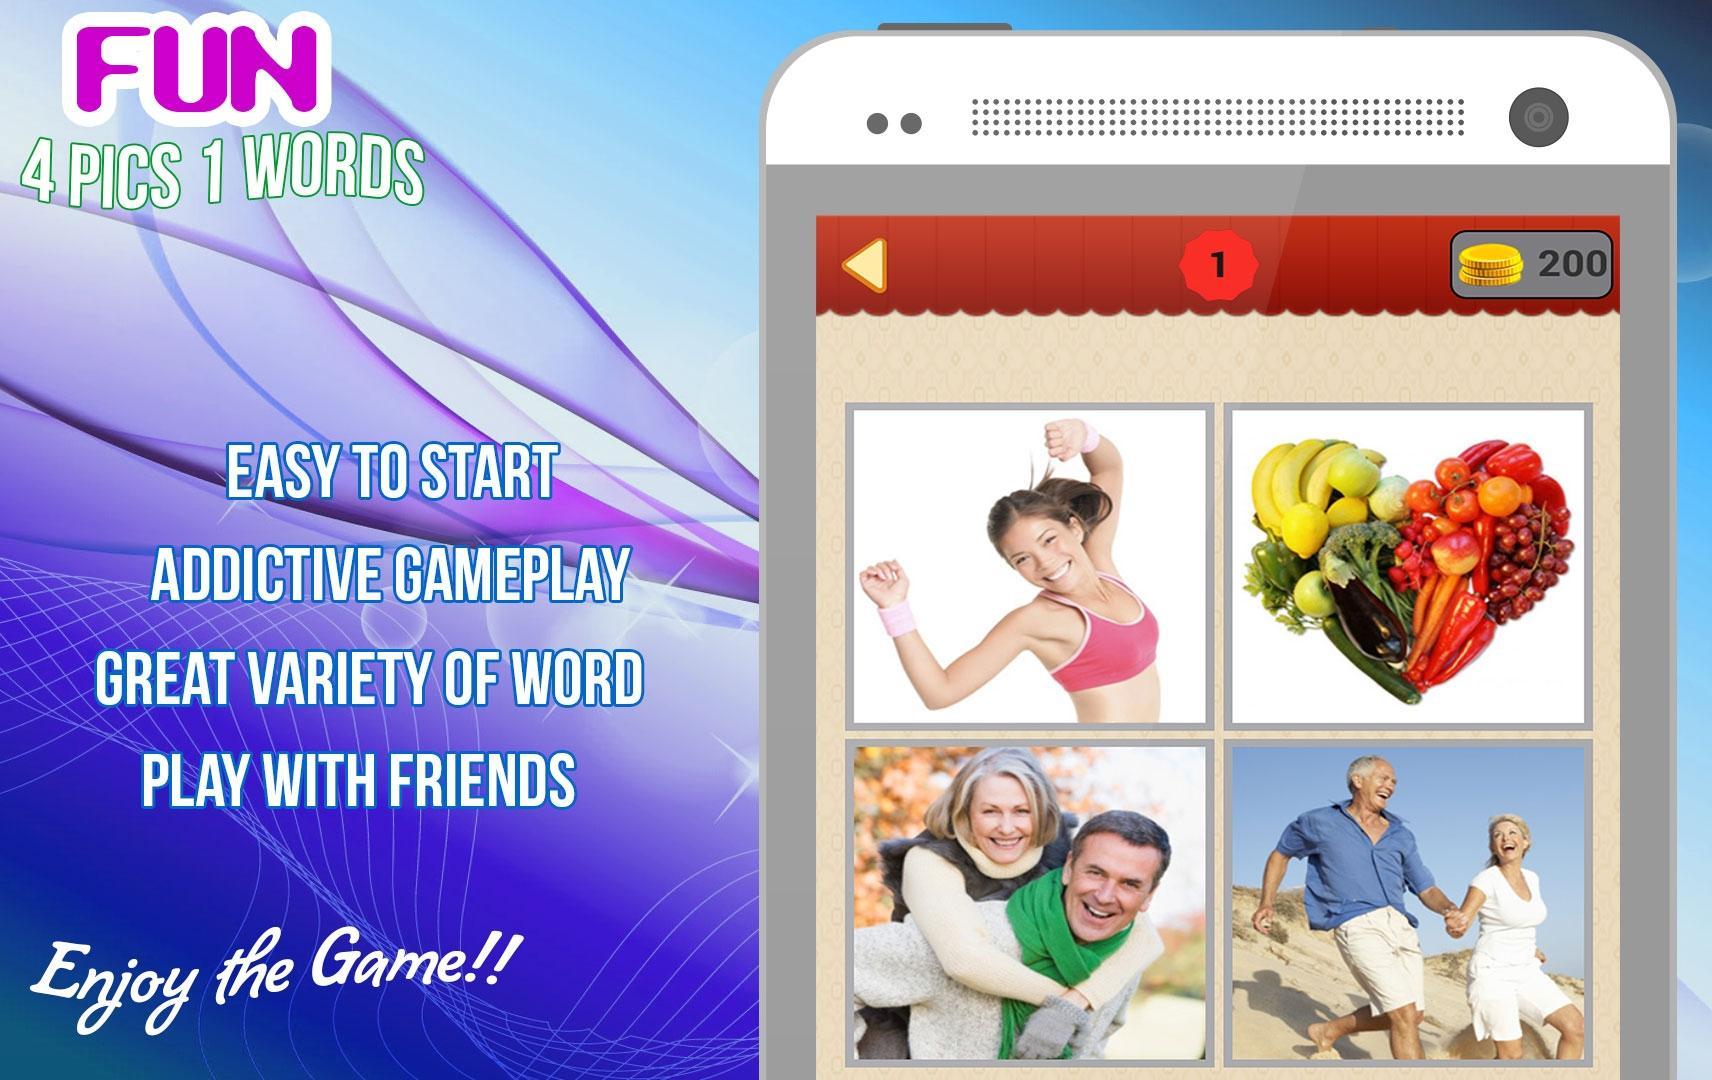 4 Pics 1 Word. 4 Pics 1 Word Gameplay. 4pics 1 Word about Health pdf. 4pics 1 Word about Health.